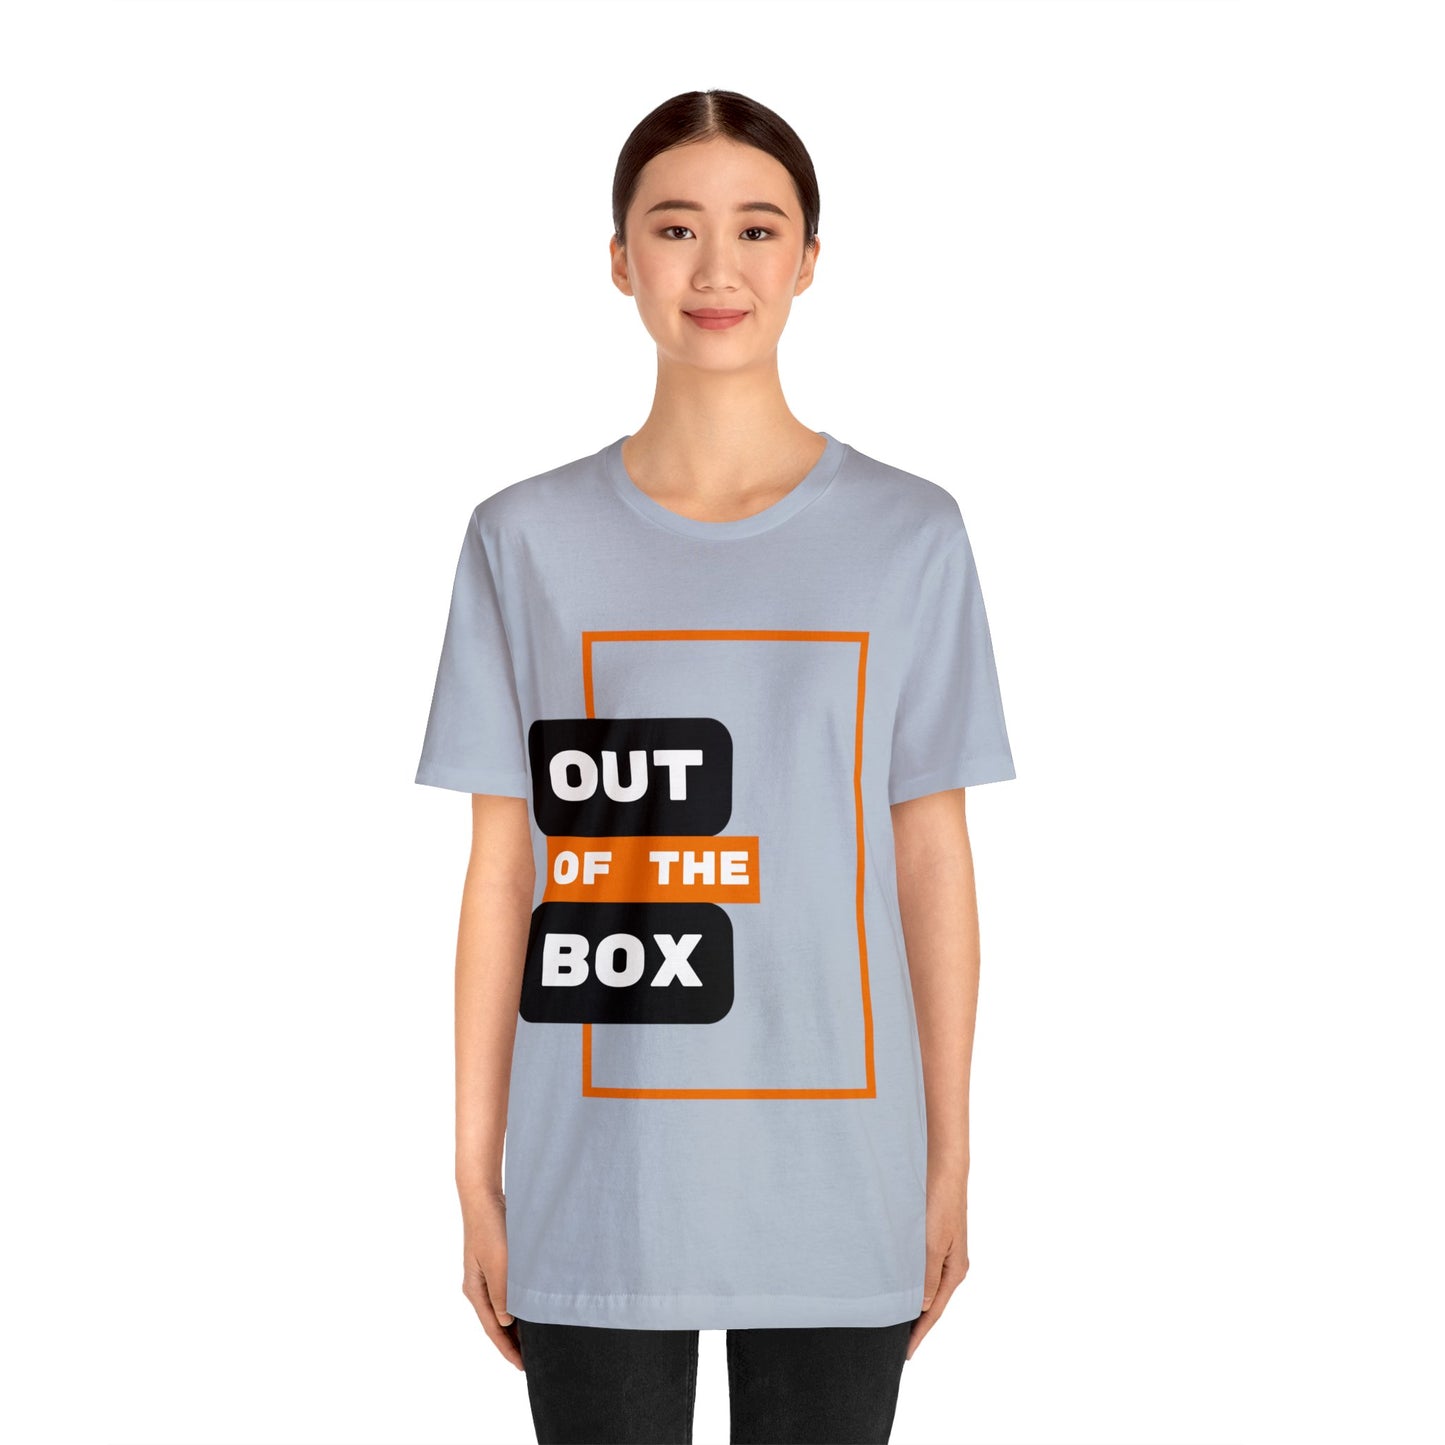 Out Of The Box - Graphic T Shirt For Men and Women